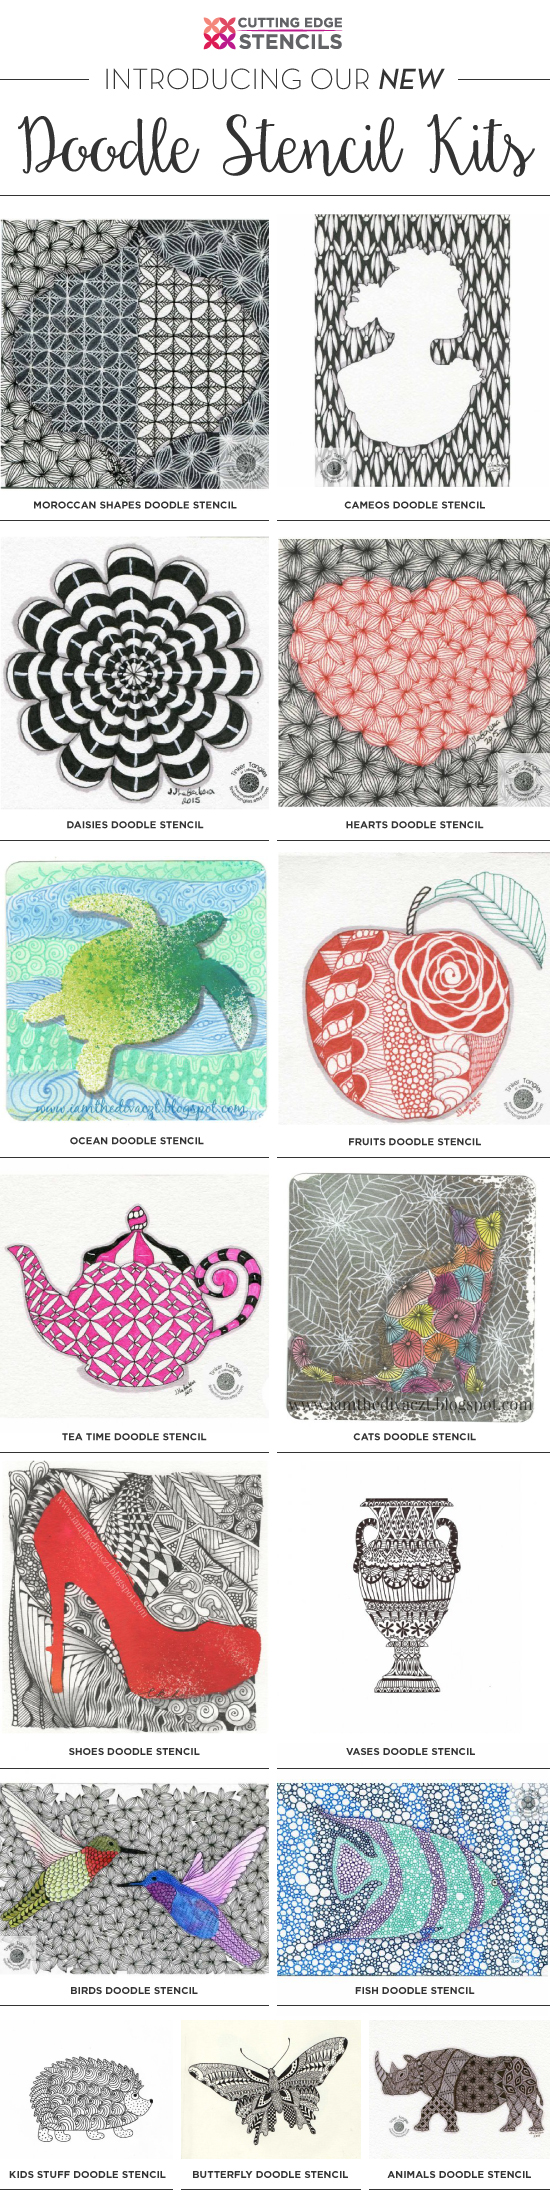 Cutting Edge Stencils is excited to introduce NEW Doodle Stencil Kits which are basic stencil shapes for doodling or tangling. http://www.cuttingedgestencils.com/doodle-stencils-tangling-stencil-doodling-coloring-pages.html